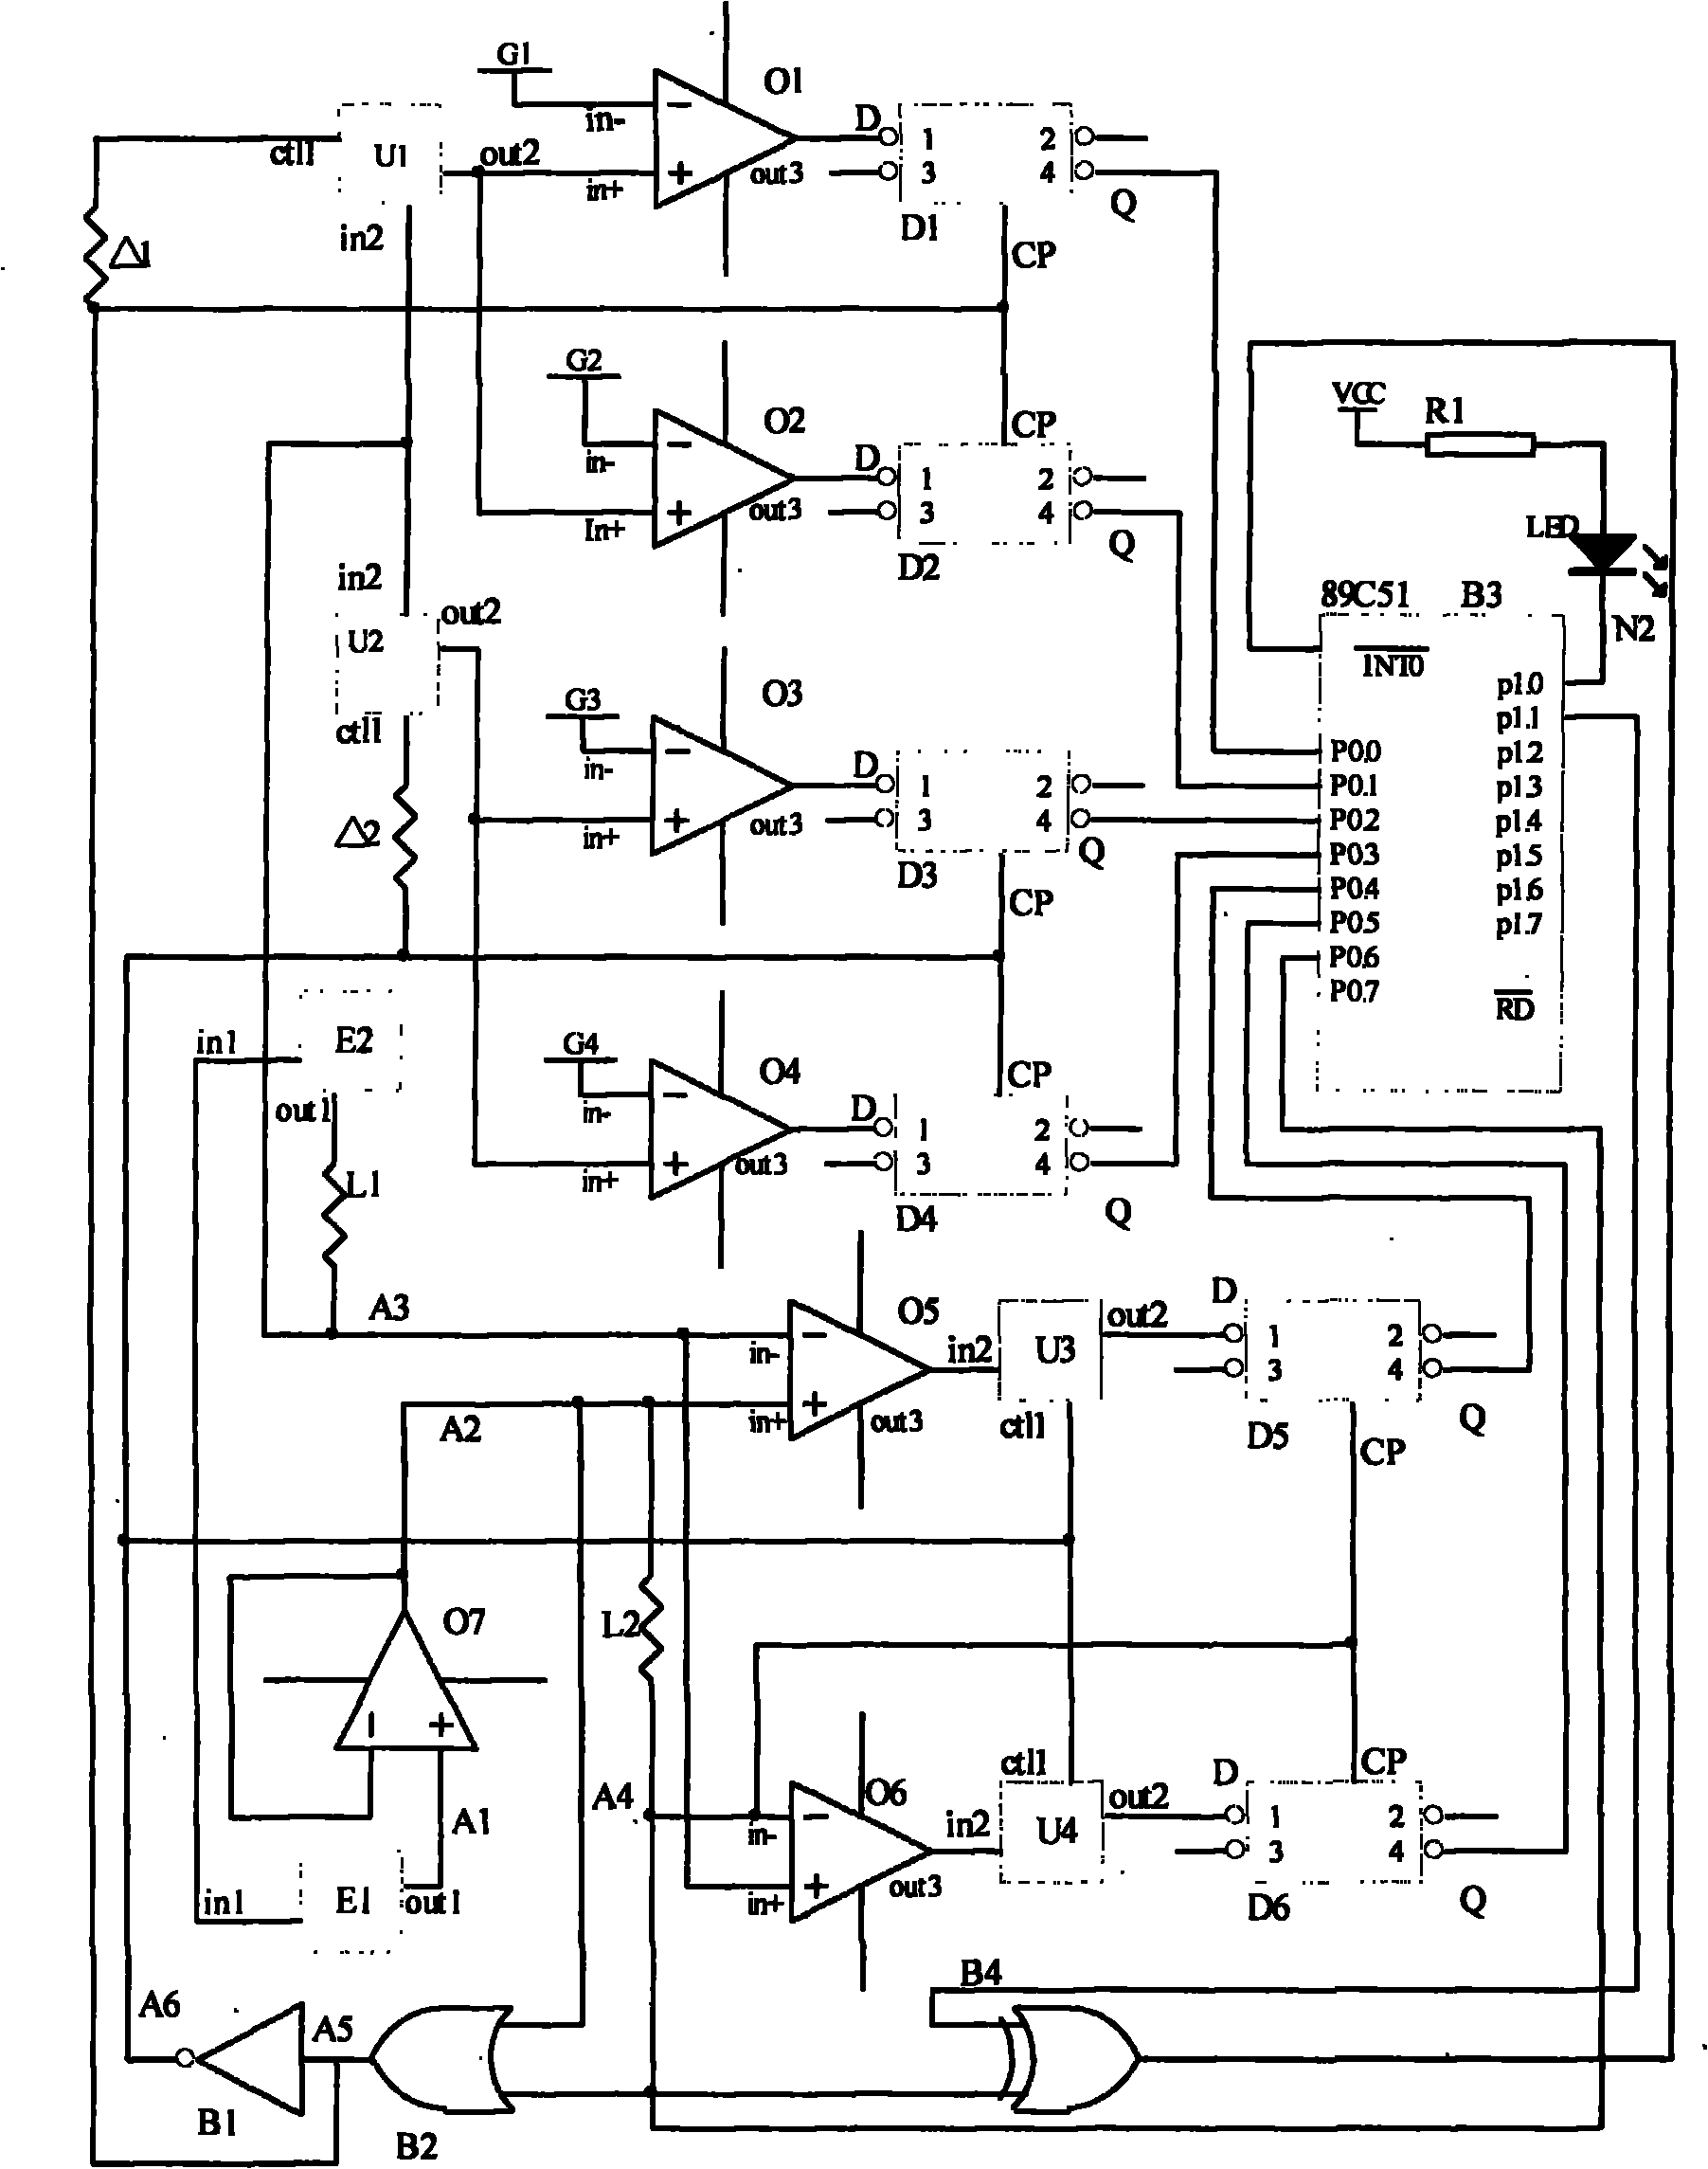 Circuit signal detection device